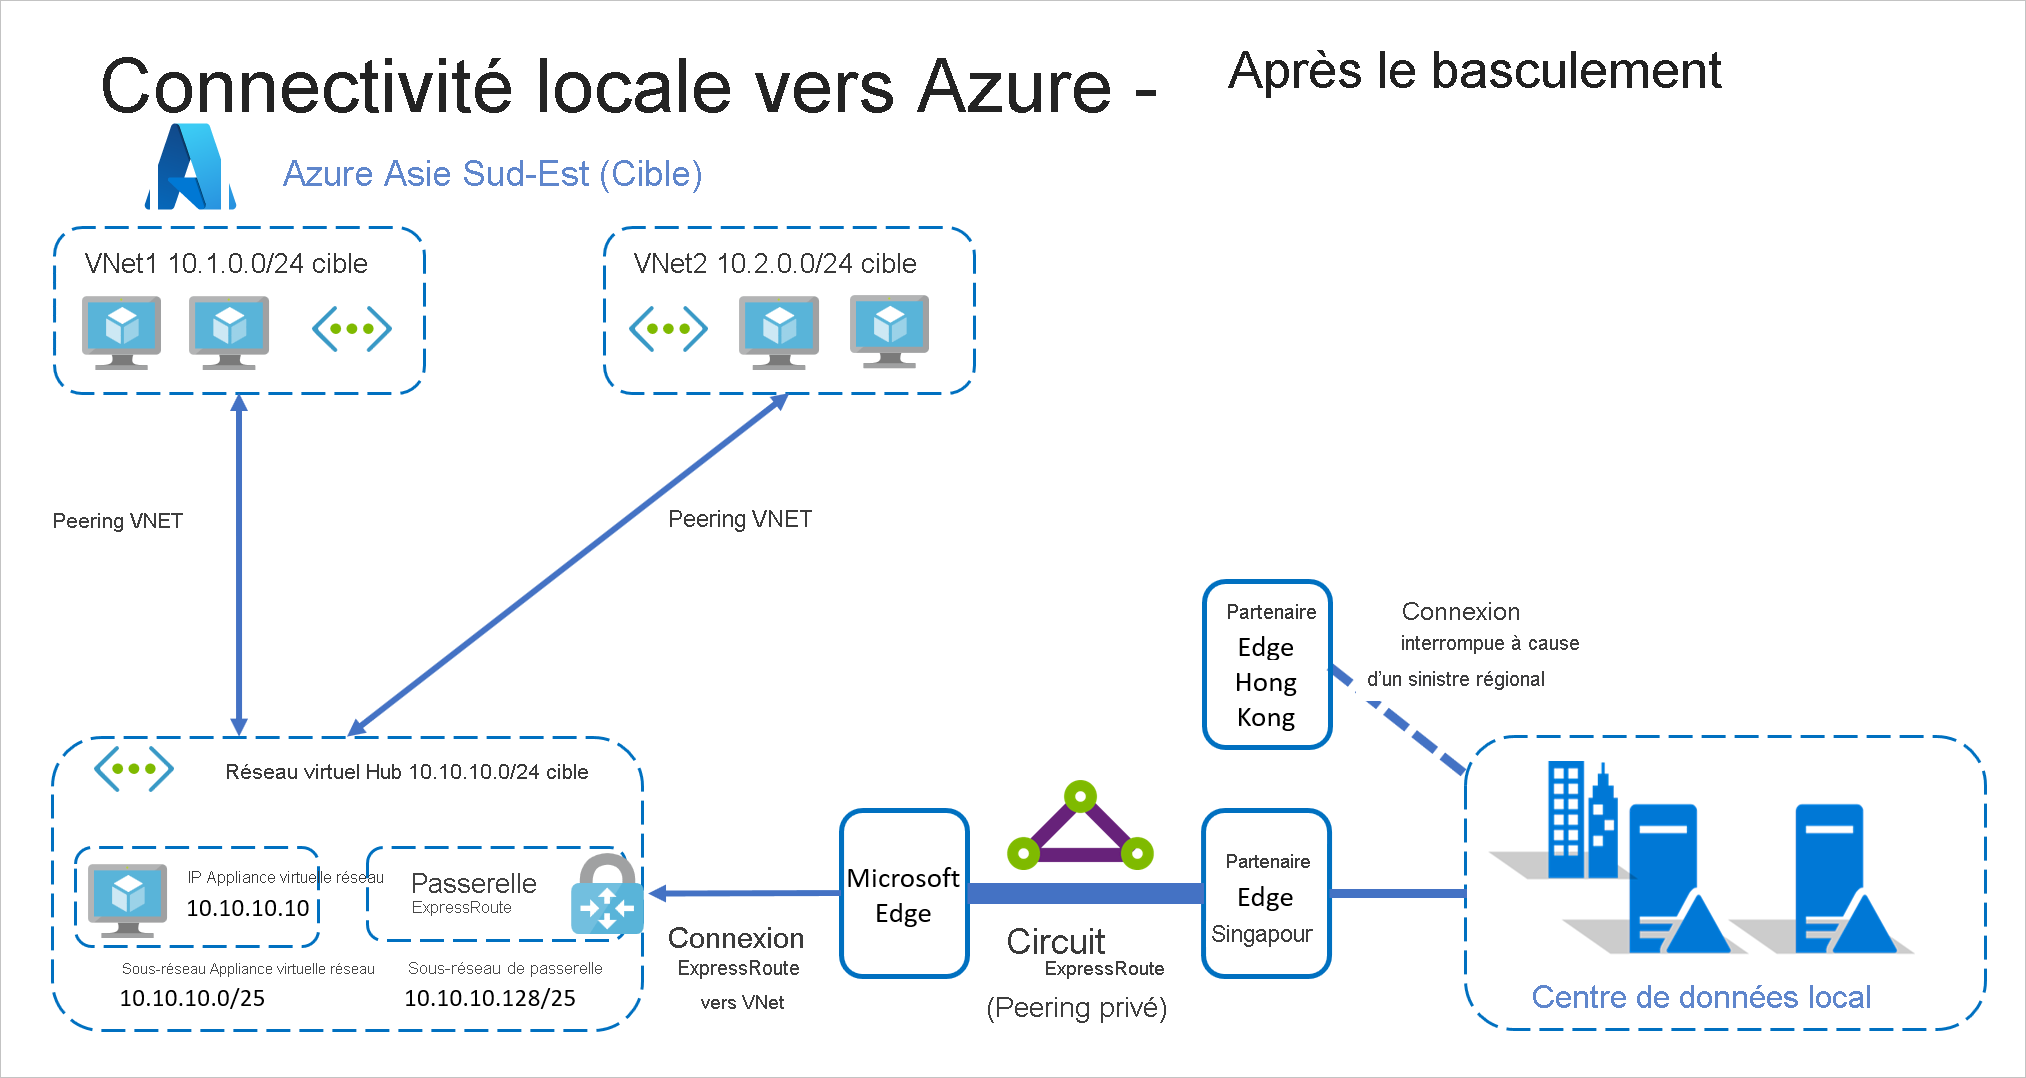 On-premises-to-Azure with ExpressRoute after Failover